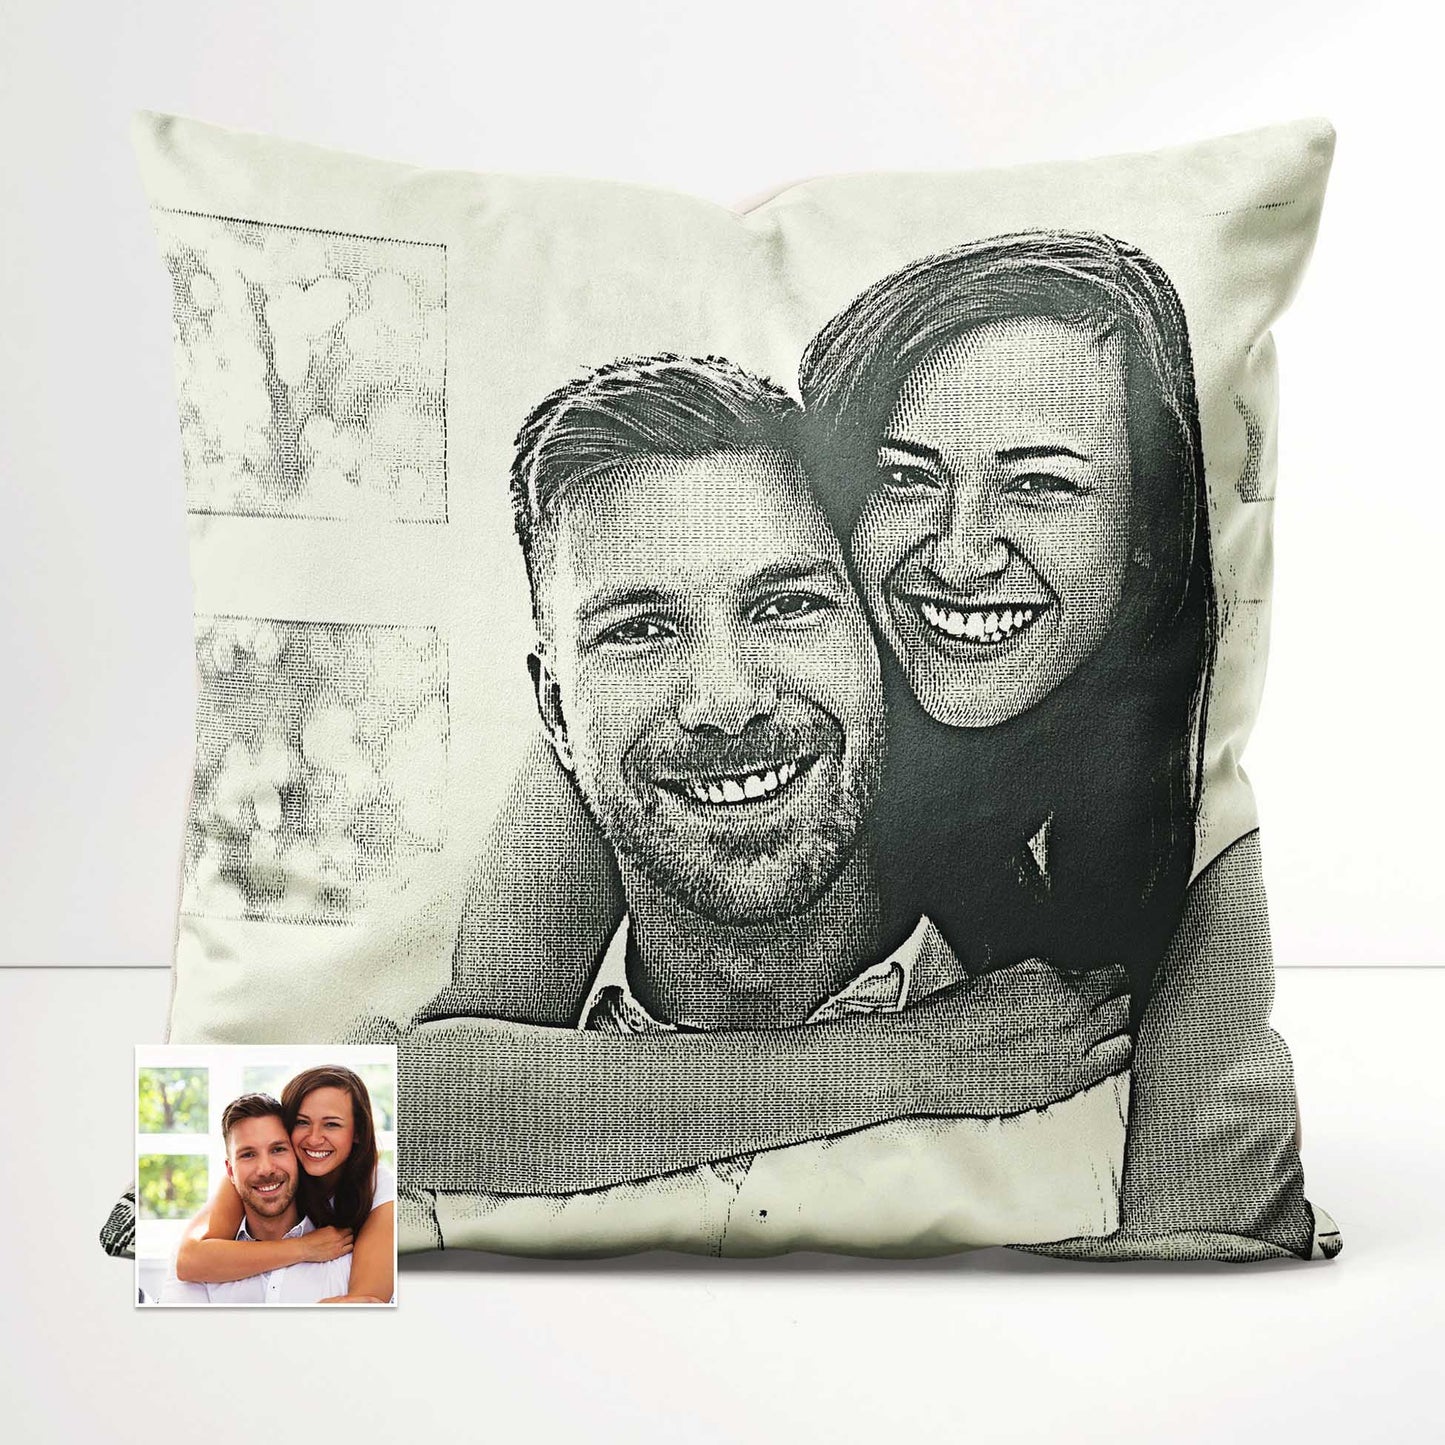 Indulge in the opulence of the Personalised Money Engraved Cushion. Its soft velvet fabric invites you to sink into comfort while its vibrant colors bring a vivid burst of life to your space, sharp and detailed engraving 